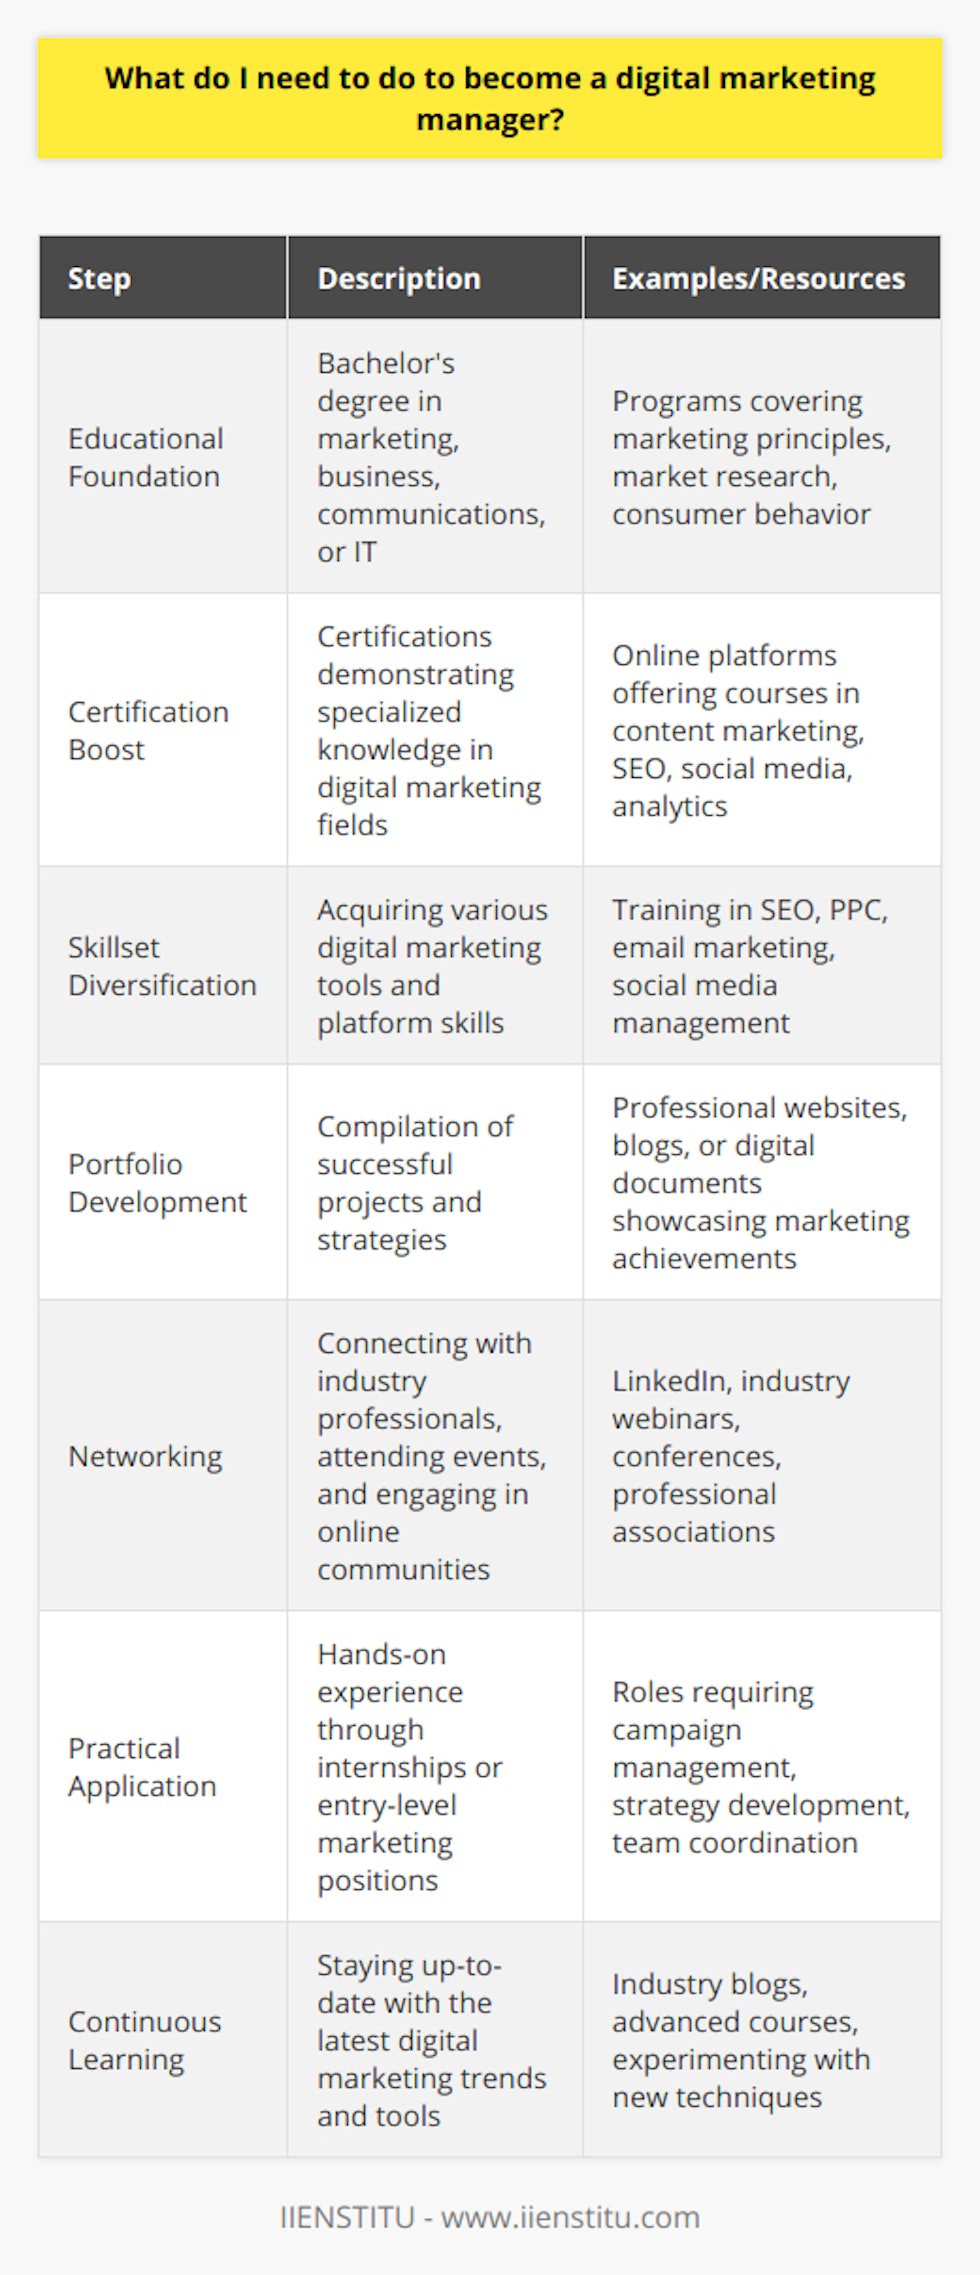 As with any career, the journey to becoming a successful digital marketing manager is paved with both education and practical experience. Here's a guide on the integral steps for anyone aiming to secure this position.Educational FoundationA bachelor's degree in fields such as marketing, business administration, communications, or information technology forms an excellent foundation. These programs typically cover core concepts that are fundamental to understanding digital marketing including marketing principles, market research, and consumer behavior.Certification BoostIn addition to tertiary education, digital marketing certifications add substantial value to your qualifications. Certifications from reputable online platforms demonstrate commitment, specialized knowledge, and proficiency in key areas such as content marketing, social media, analytics, and SEO.Skillset DiversificationTo thrive as a digital marketing manager, it’s essential to be well-versed in various digital tools and platforms. Skills in SEO and PPC are non-negotiable for driving online traffic, while email marketing requires an understanding of consumer engagement tactics. Similarly, social media management necessitates skills in content creation, publishing, and community interaction. Acquiring these skills can be done through online courses, self-study, and practice.Portfolio DevelopmentA strong portfolio is an irrefutable testament to your expertise. It's your professional narrative illustrated through successful campaigns and strategies implemented in the past. Whether through a professional website, blog, or digital document, your portfolio should showcase a range of skills and reflect measurable successes in your digital marketing endeavors.NetworkingBuilding connections with other professionals in the field can open doors to opportunities and insights. Involvement in digital marketing communities, attending webinars, and being active on LinkedIn are effective ways to network. Attending industry conferences and joining associations can also lead to mentorship opportunities and collaborations.Practical ApplicationTheoretical knowledge needs to be complemented with hands-on experience. Starting with internships or entry-level jobs, even on a freelance basis, can be invaluable. It is through actual campaign management, team coordination, budget oversight, and strategy development that you'll refine your managerial capabilities.Continuous LearningDigital marketing is an ever-evolving field. Staying informed with the latest trends, tools, and strategies is imperative. This might involve regularly reading industry blogs, taking new courses as the market evolves, and even experimenting with new digital marketing platforms or techniques.In essence, becoming a digital marketing manager is a blend of formal and continuous education, industry engagement, strategic skill development, and practical experience. By committing to these steps and displaying passion and adaptability within the digital realm, you’re on a path to leading successful marketing teams and campaigns in the vibrant world of digital marketing.